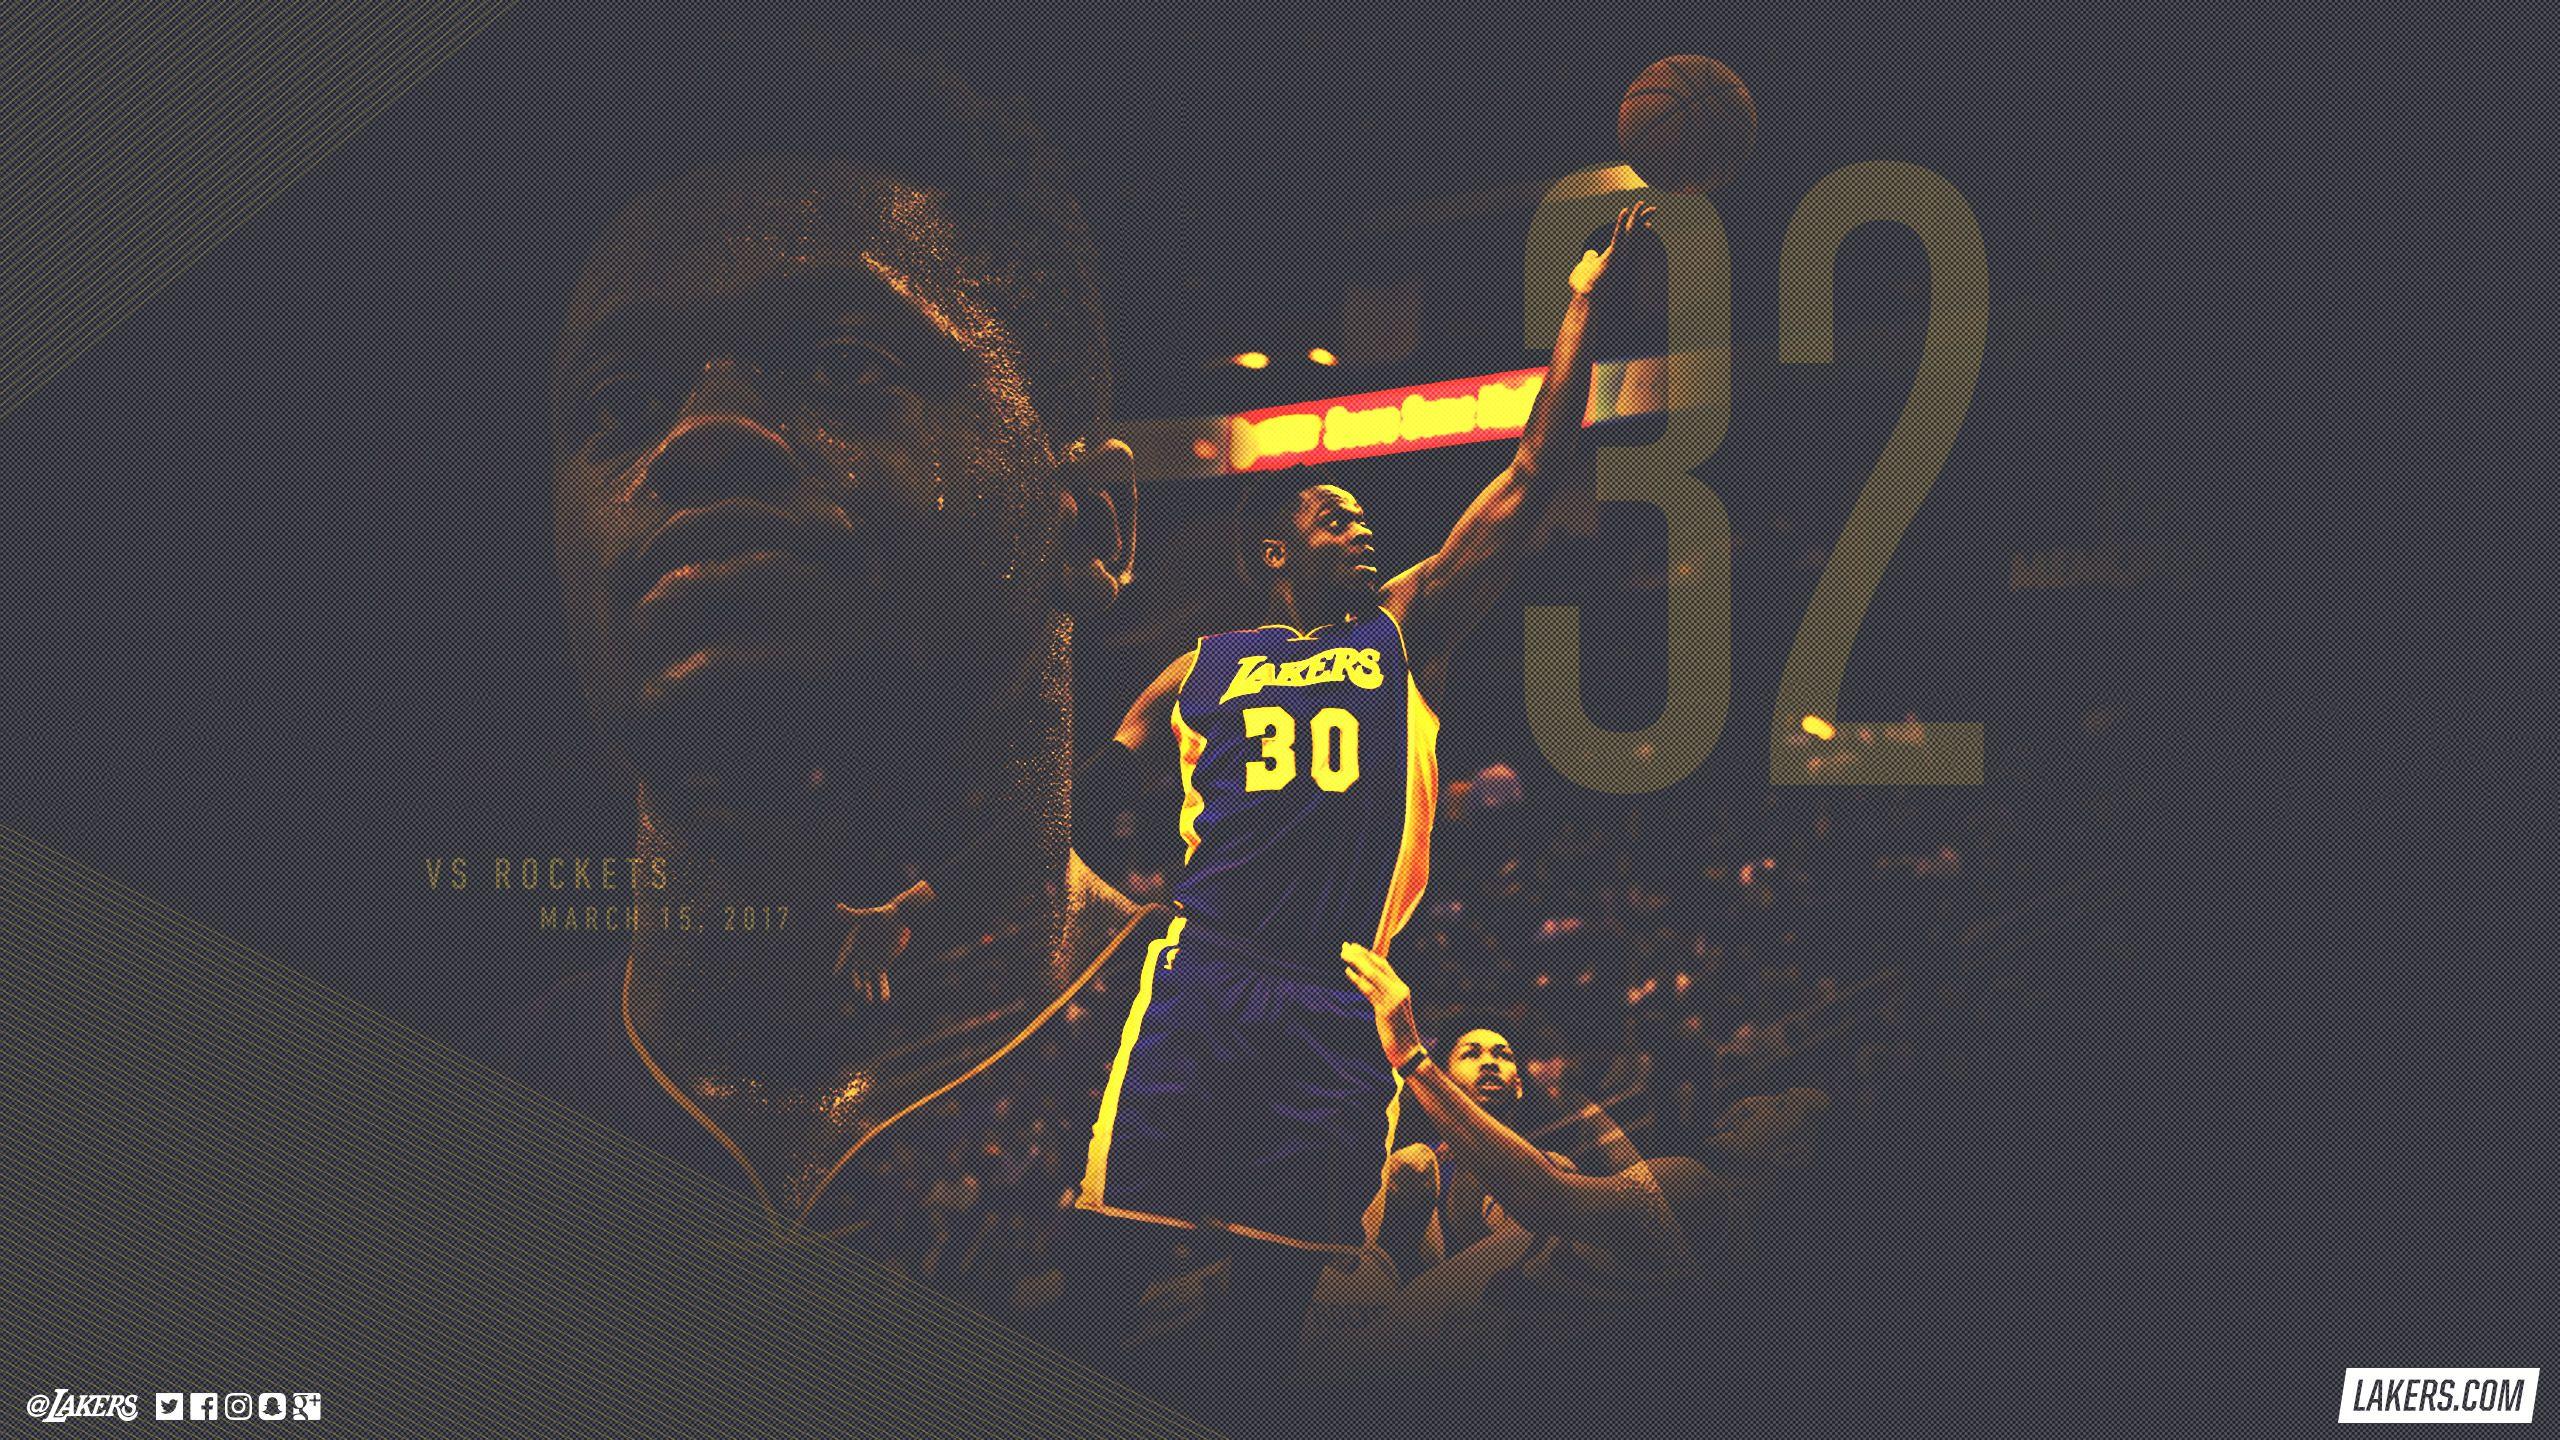 Lakers Wallpaper Archive. Los Angeles Lakers